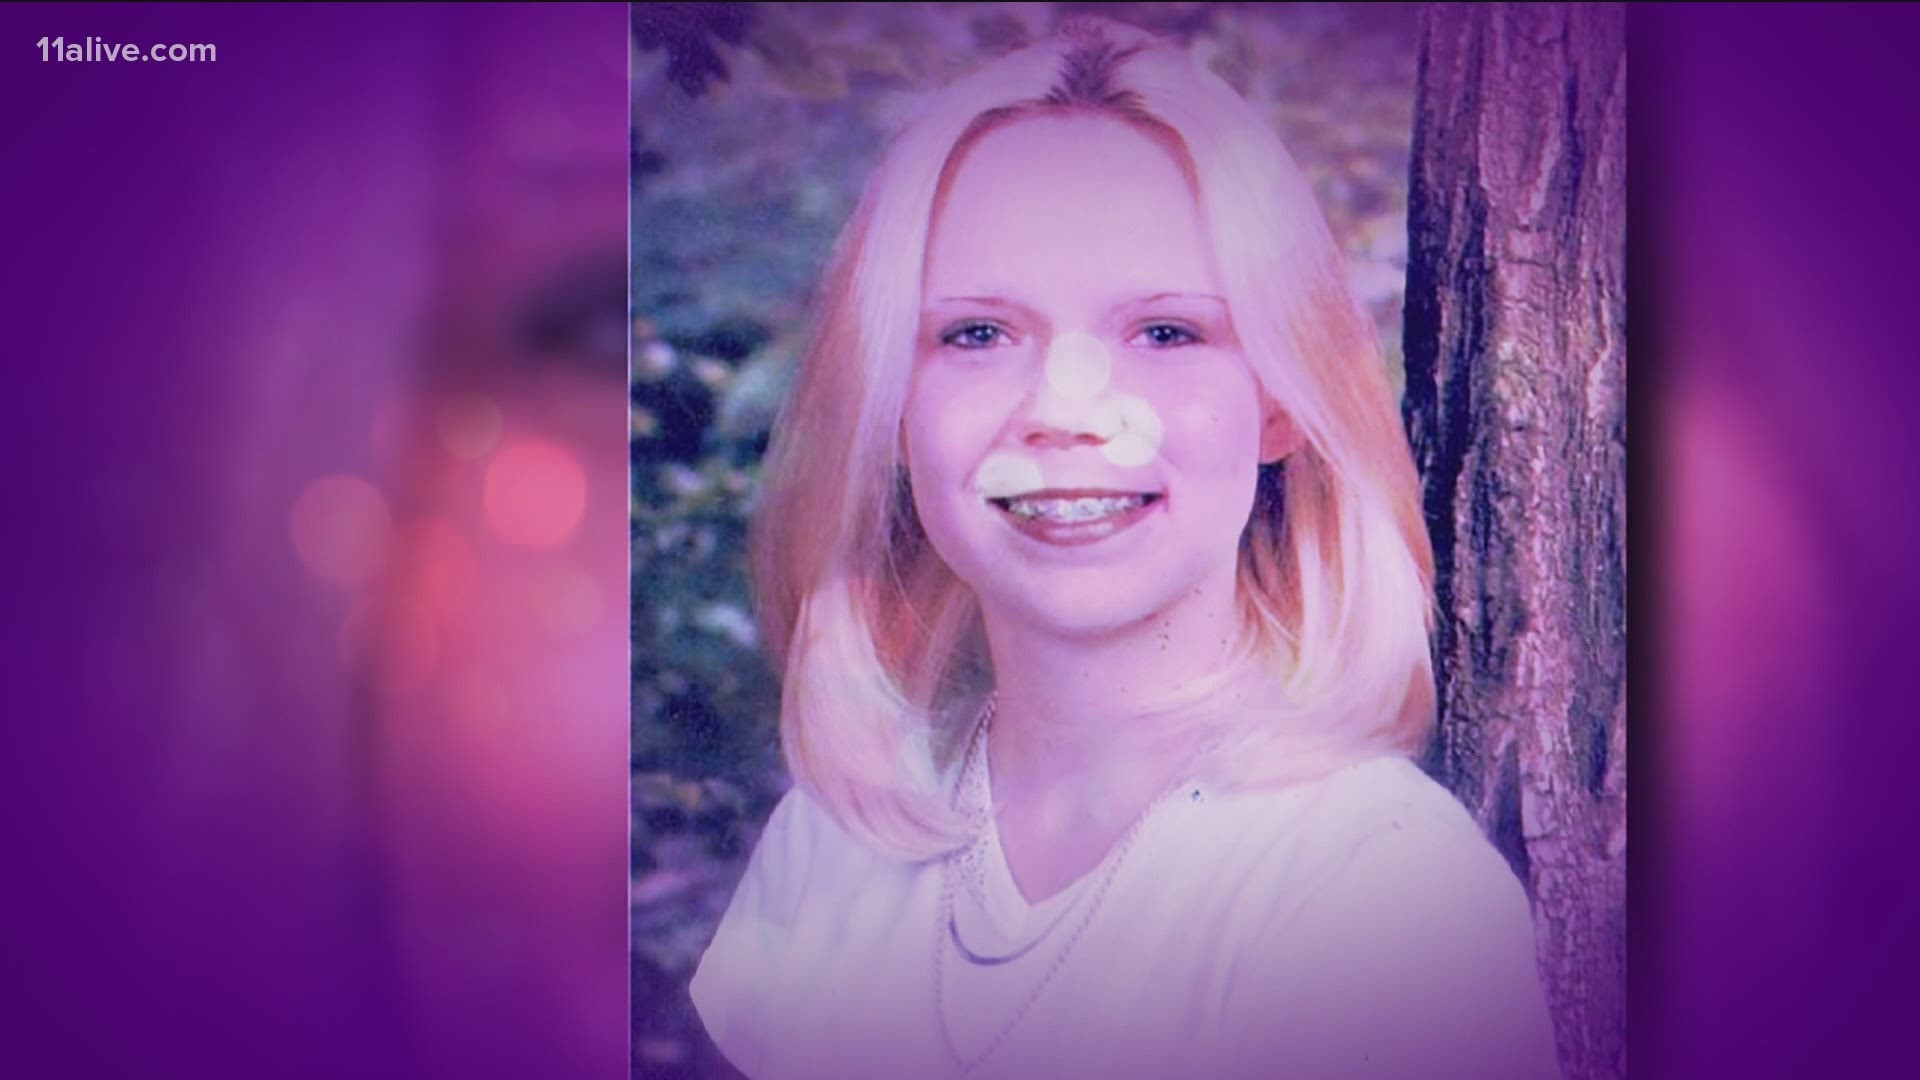 It has been 21 years since Elaine Nix's body was found. She was just 18-years-old when she was killed in Gainesville.